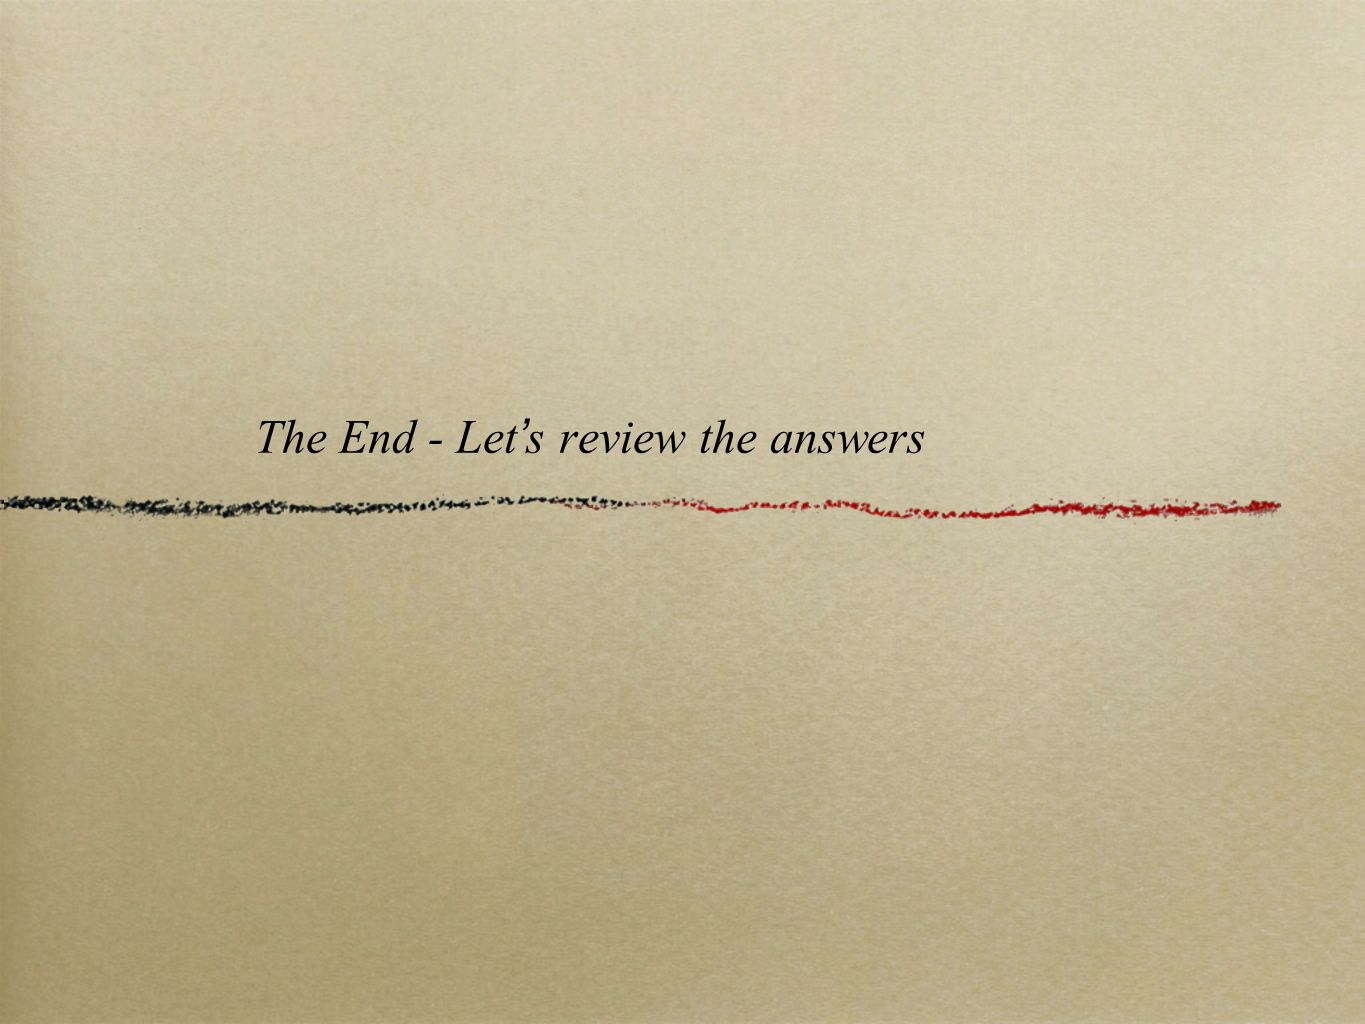 The End - Let’s review the answers